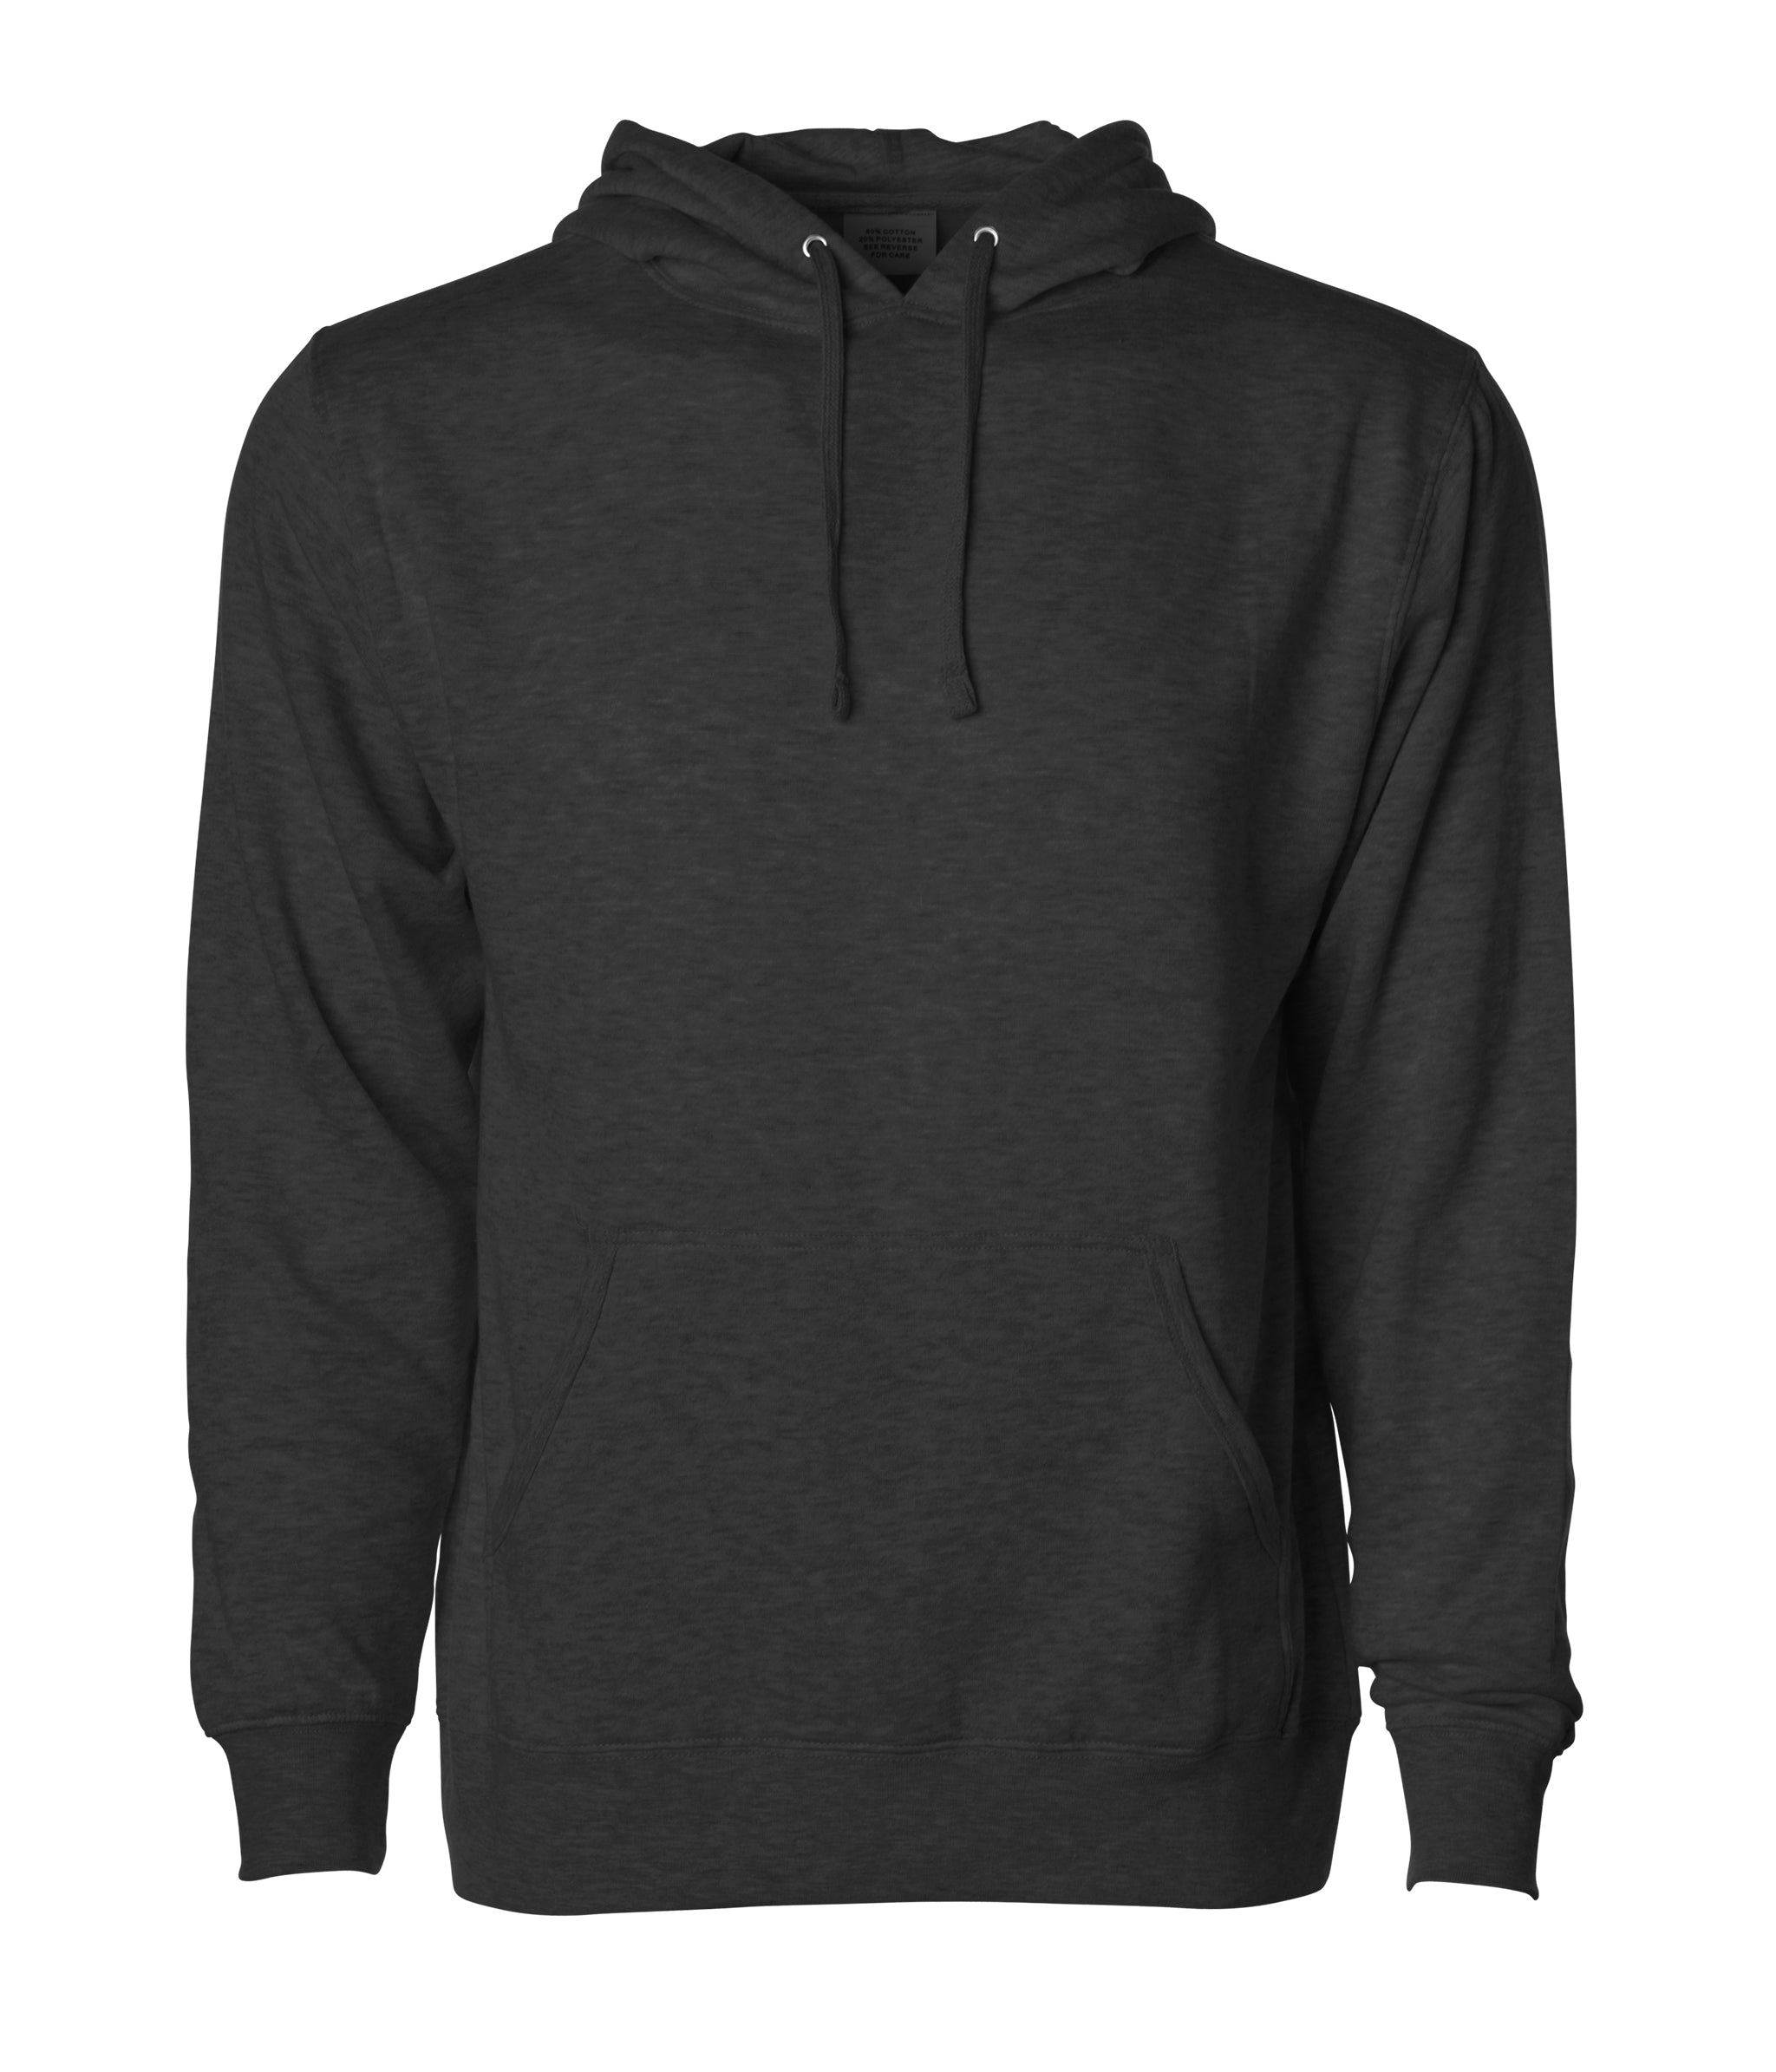 Lightweight Hooded Pullover Sweatshirts | Independent Trading Company